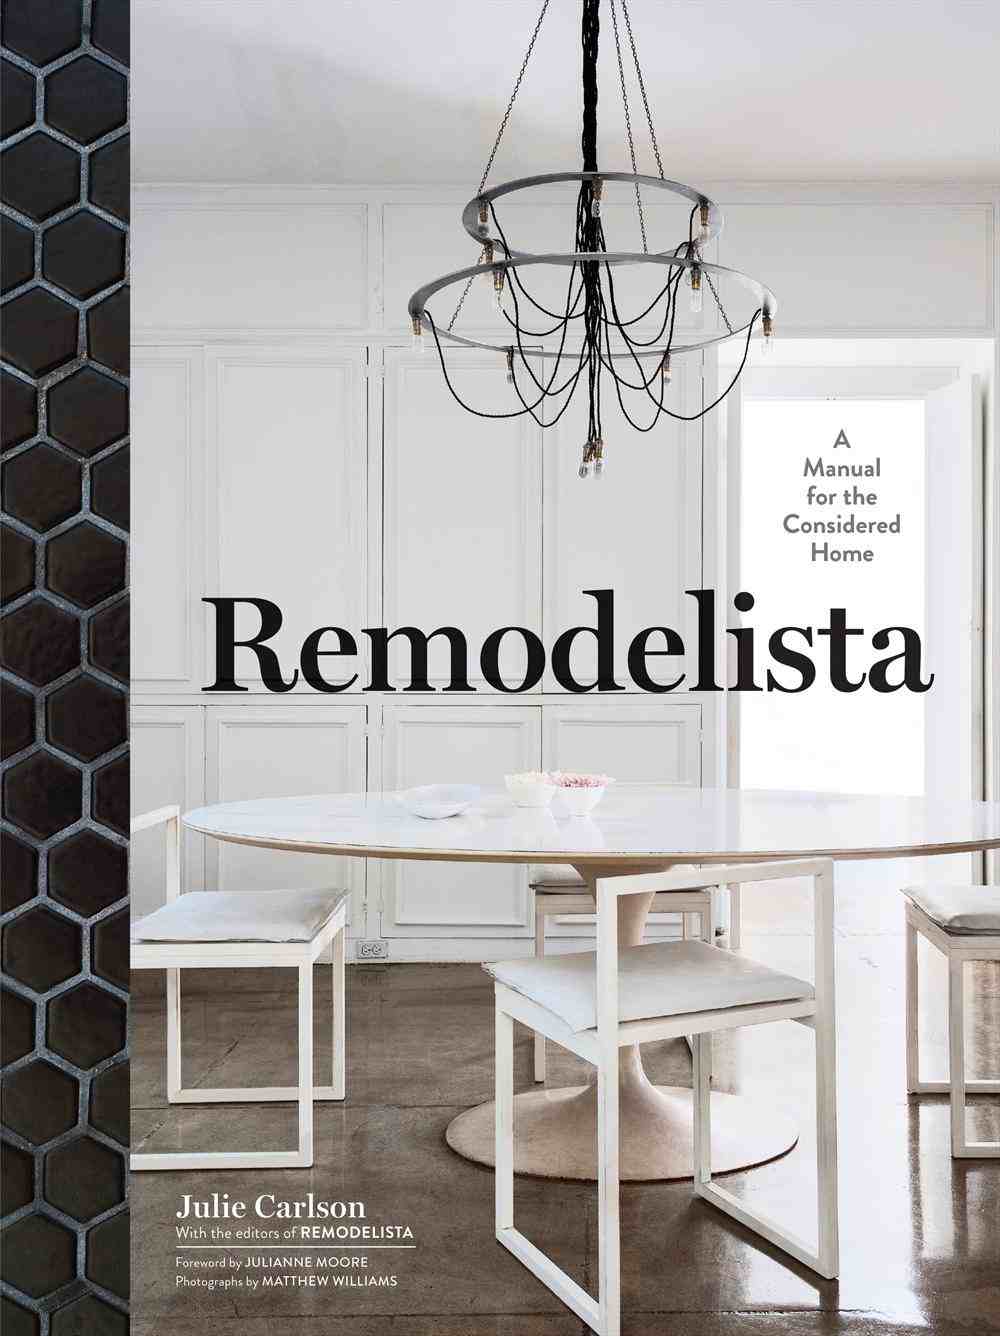 Remodelista: A Model for the Considered Home